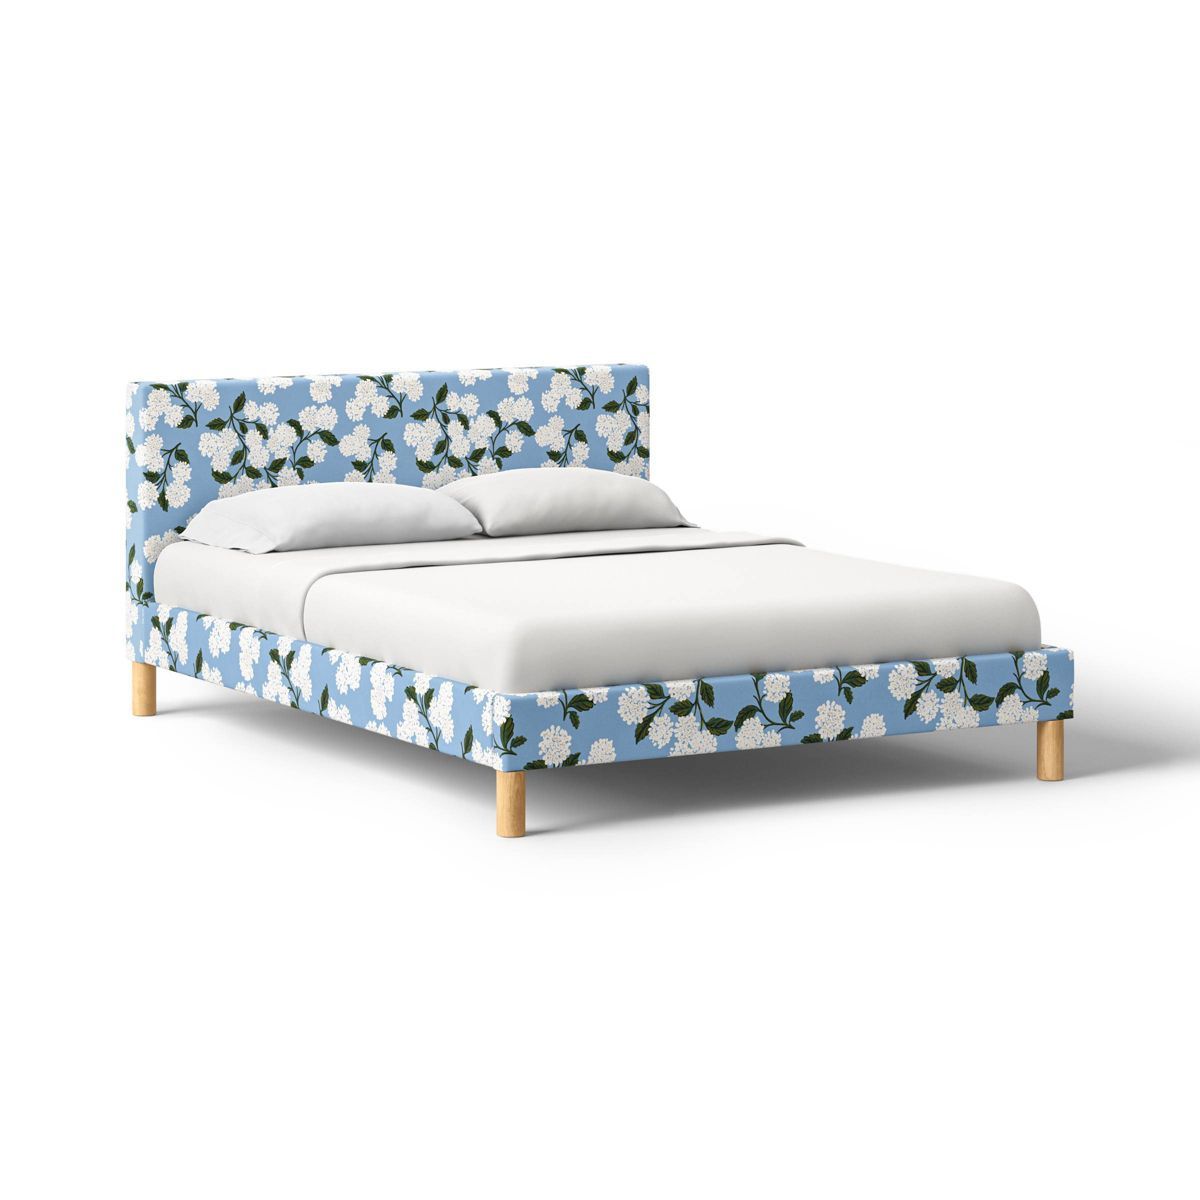 Rifle Paper Co. x Target Upholstered Bed | Target